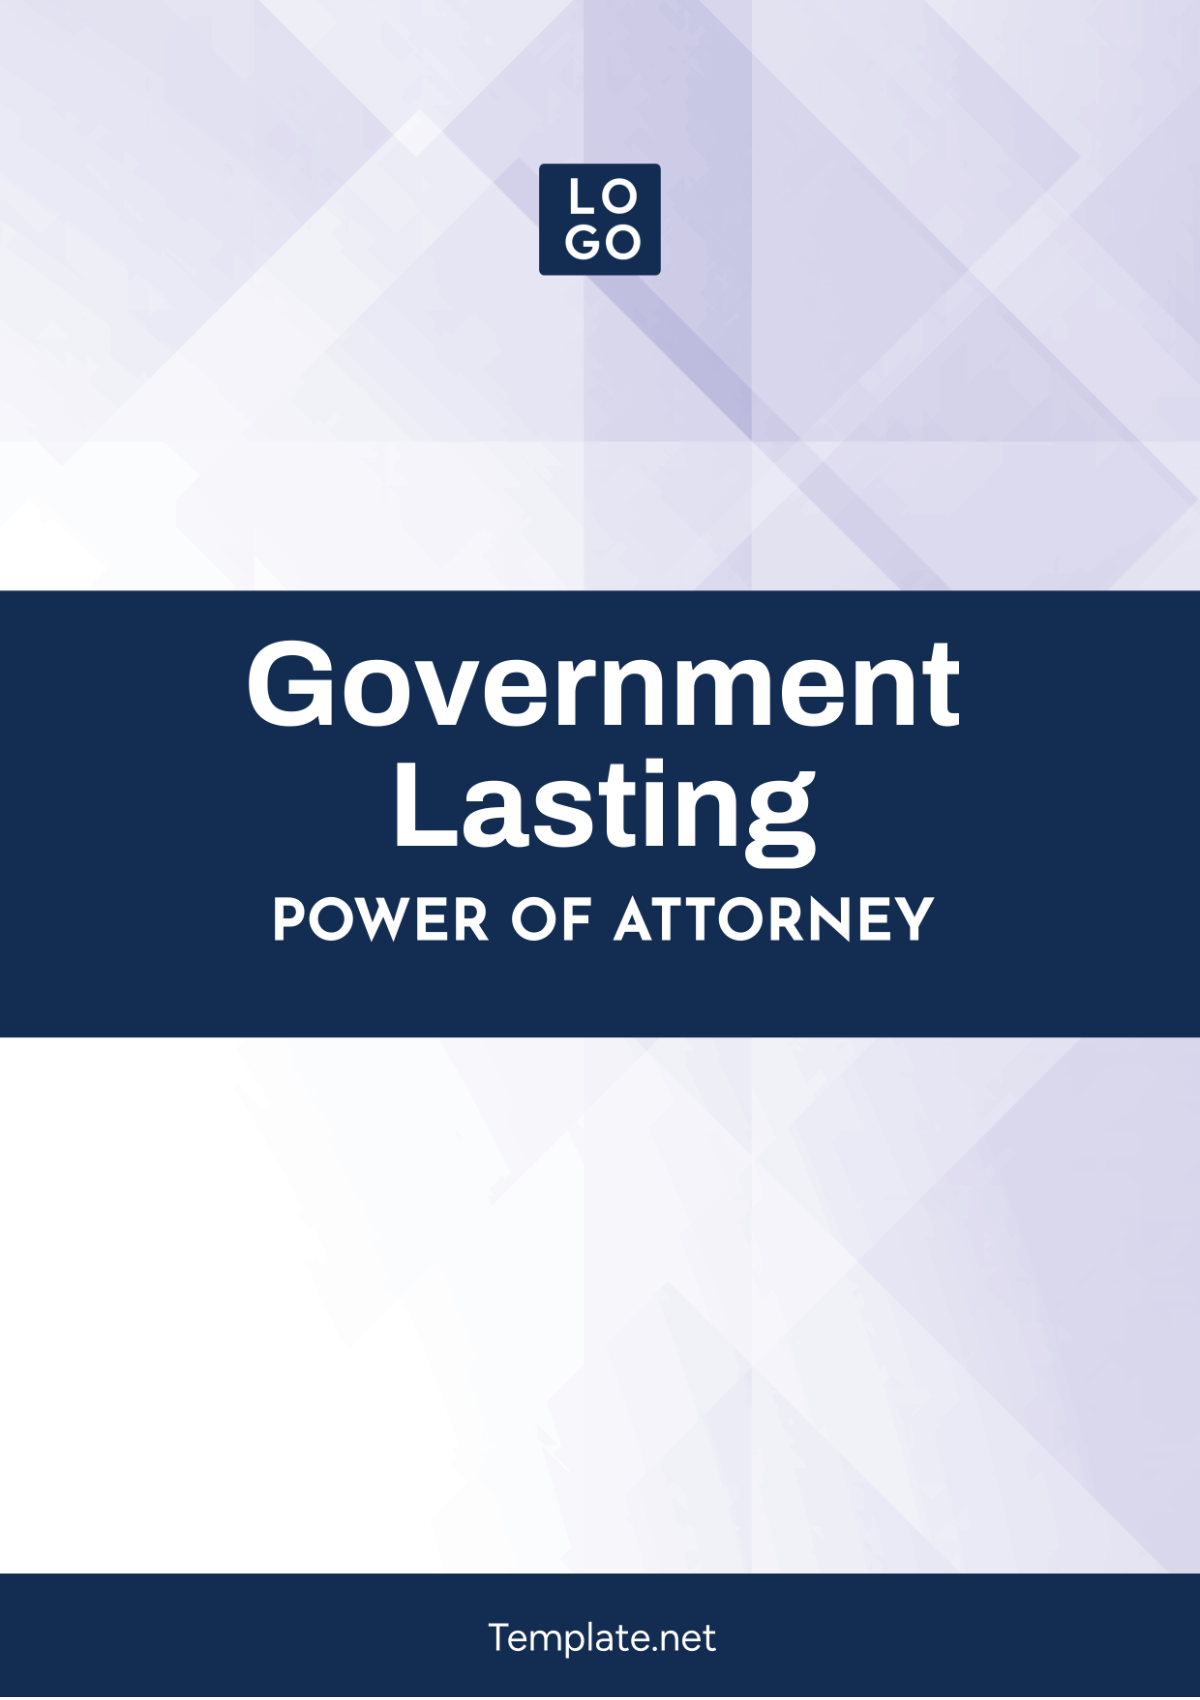 Government Lasting Power of Attorney Template